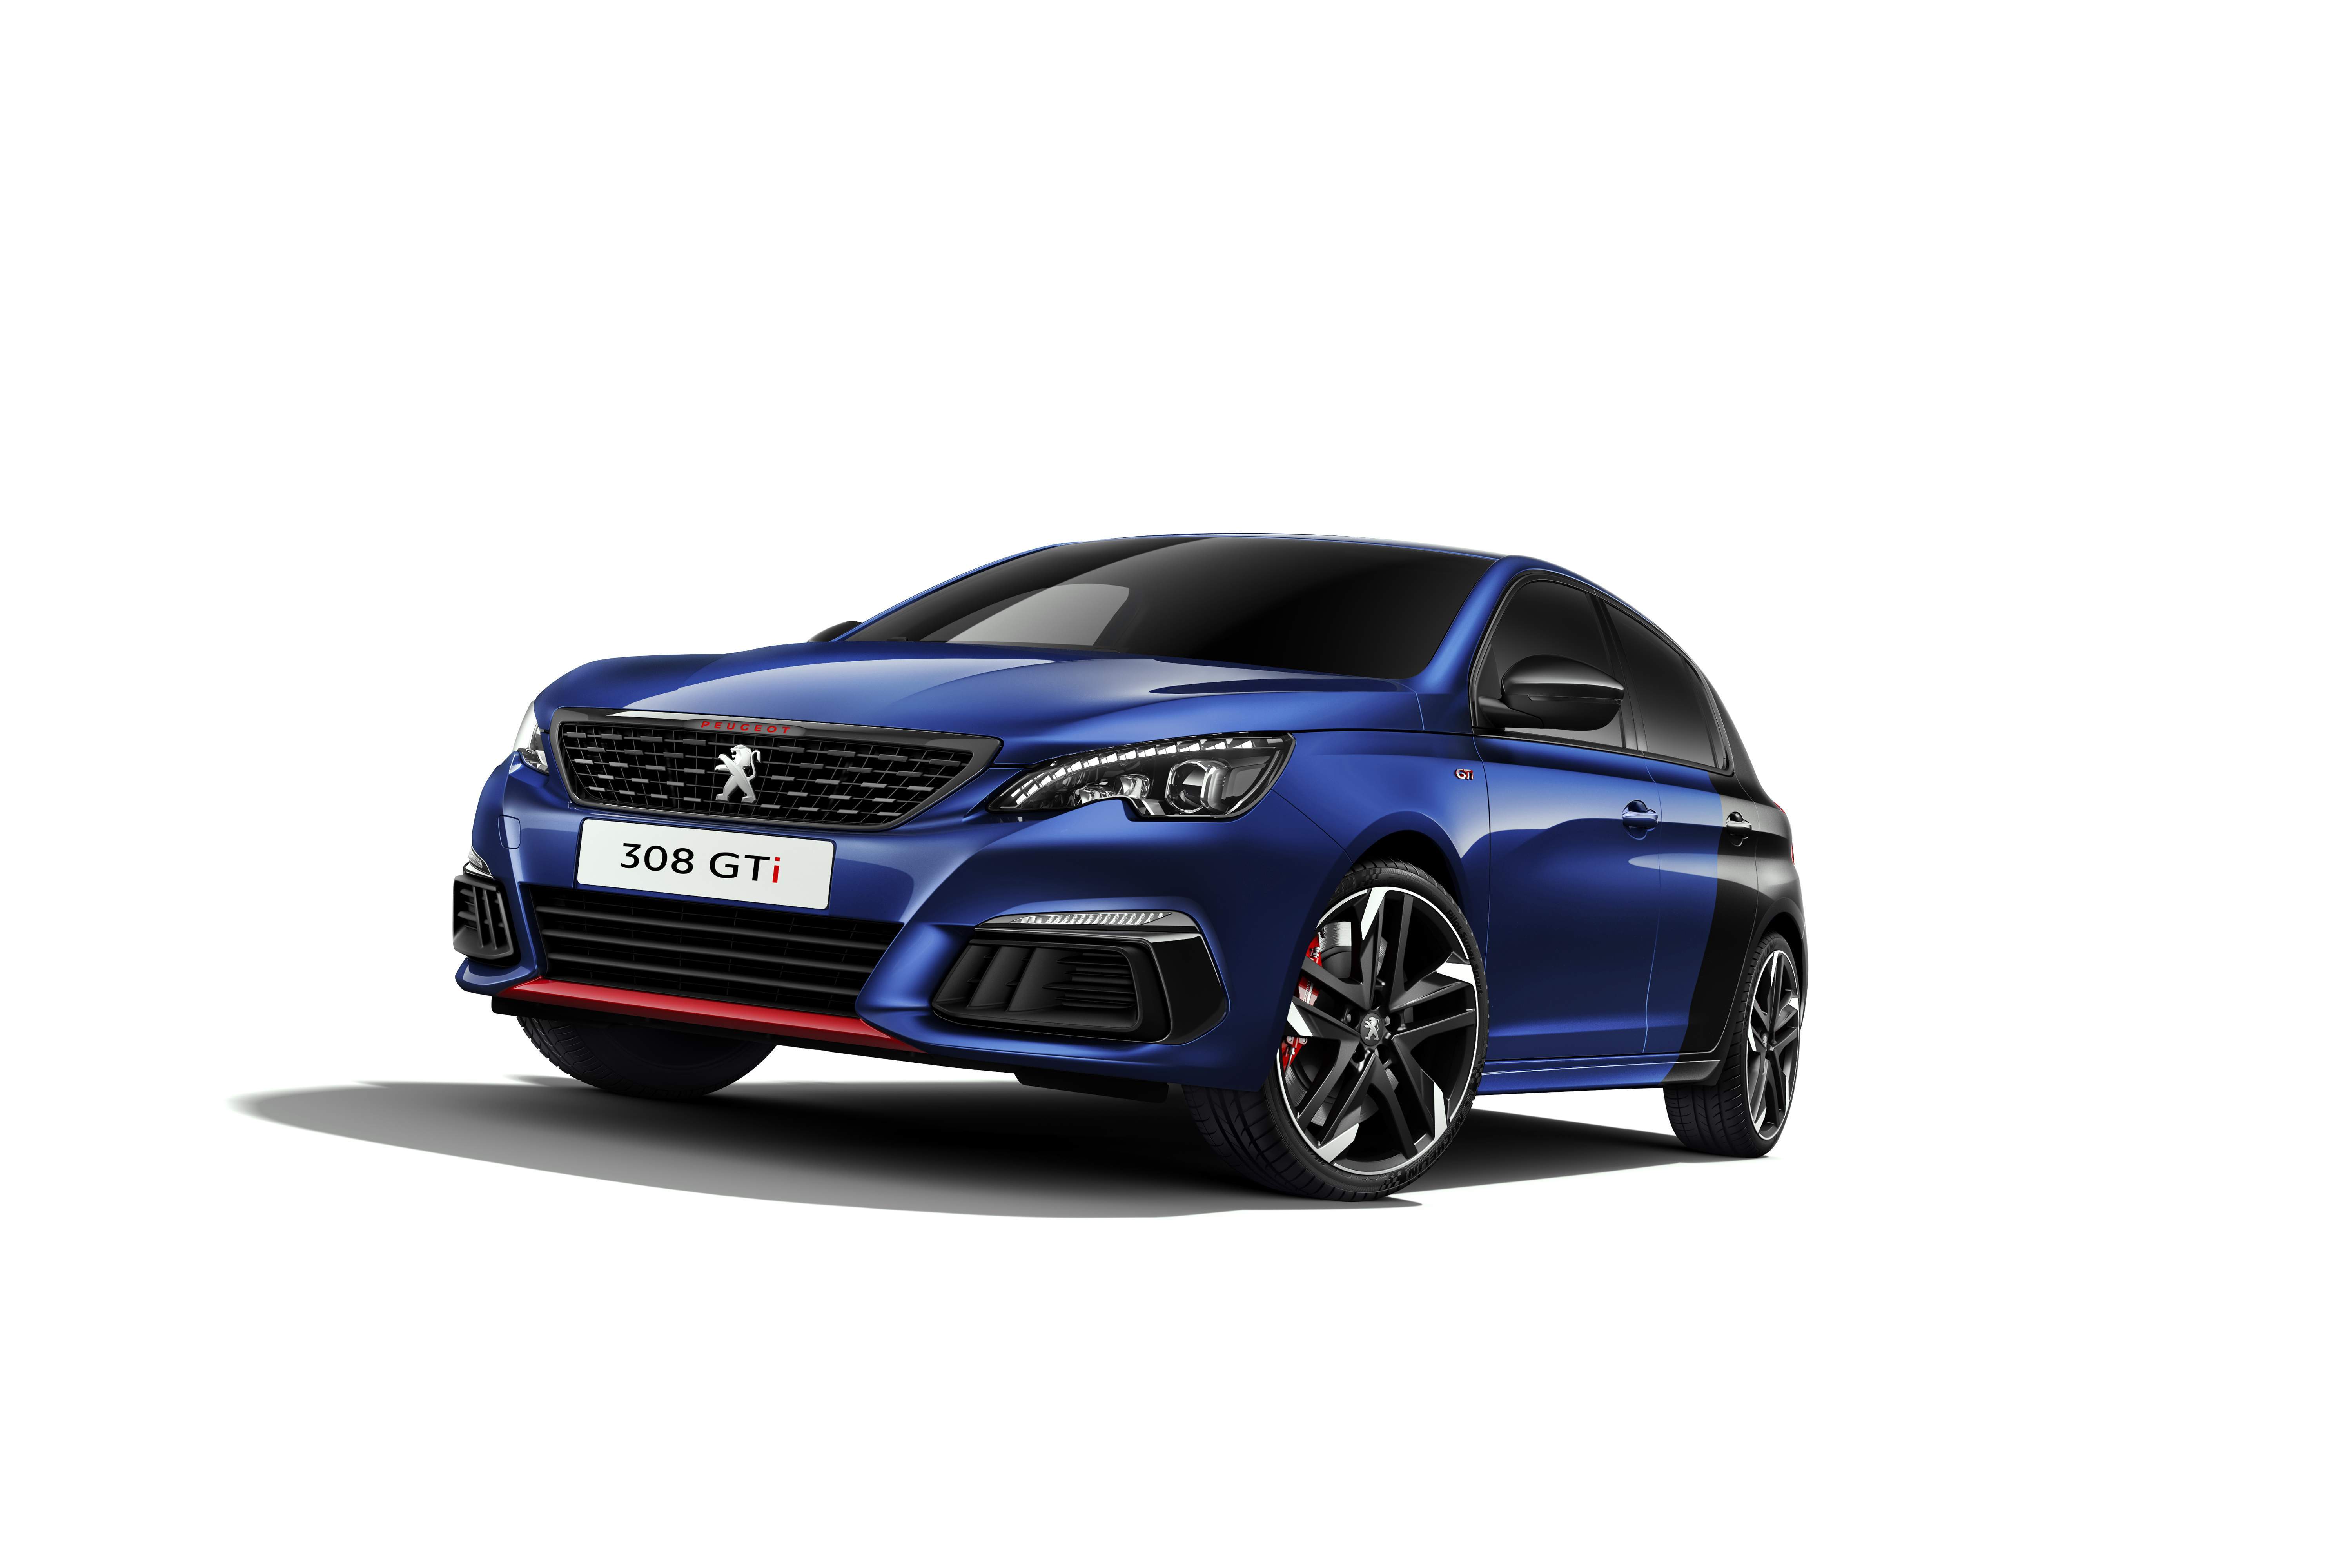 Peugeot 308 GTi exterior specifications